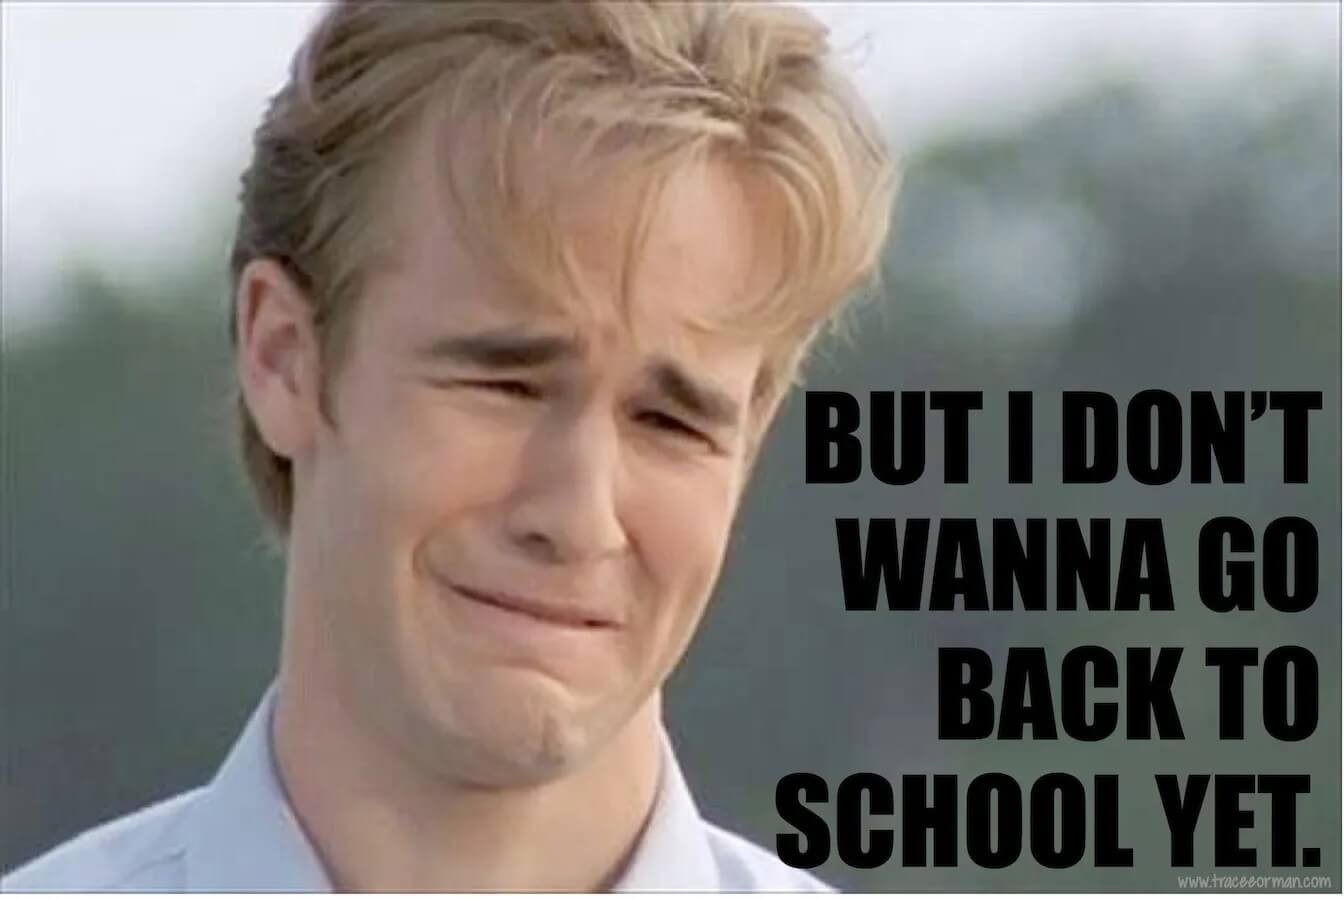 memes in spanish about school | back to school memes | memes about school